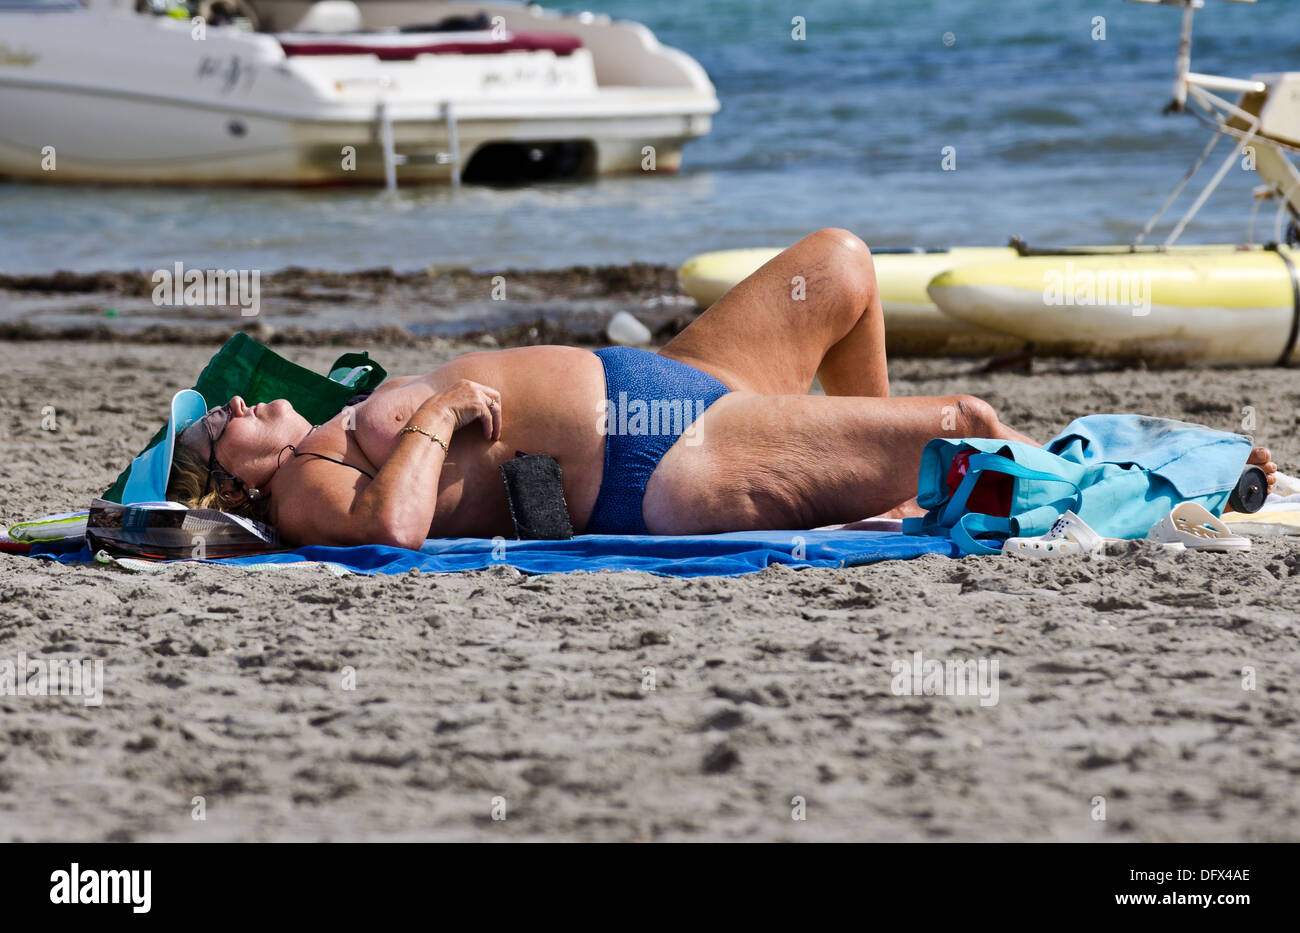 Obese lady sunbathing on the beach in Spain Stock Photo